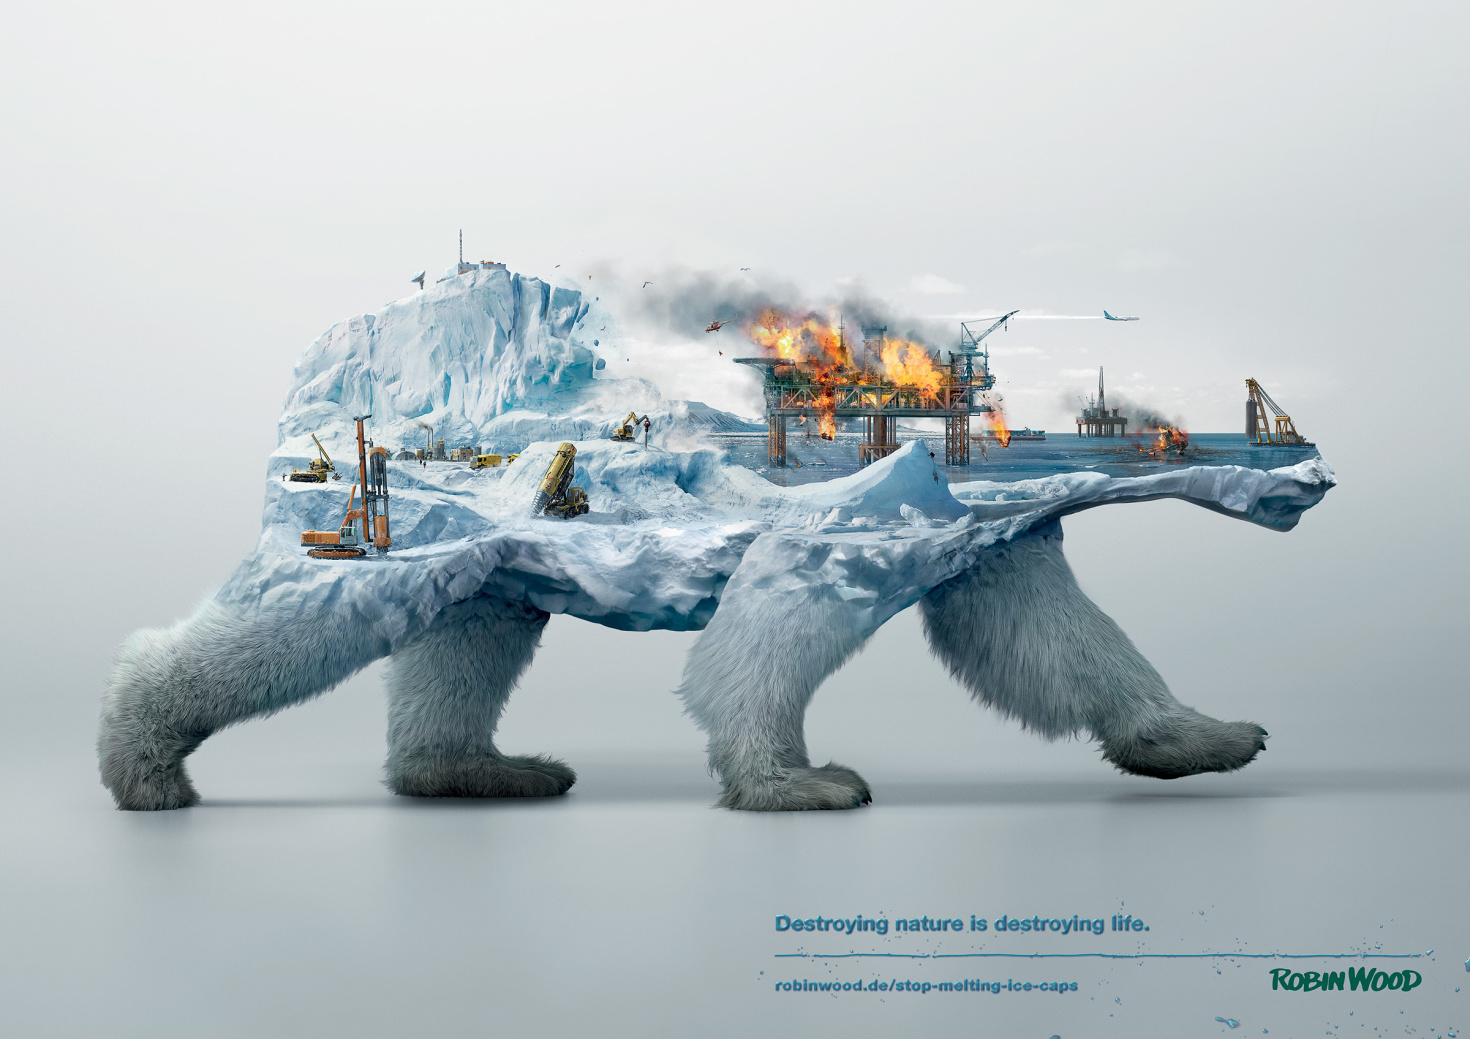 Destroying Nature is Destroying Life Ad1